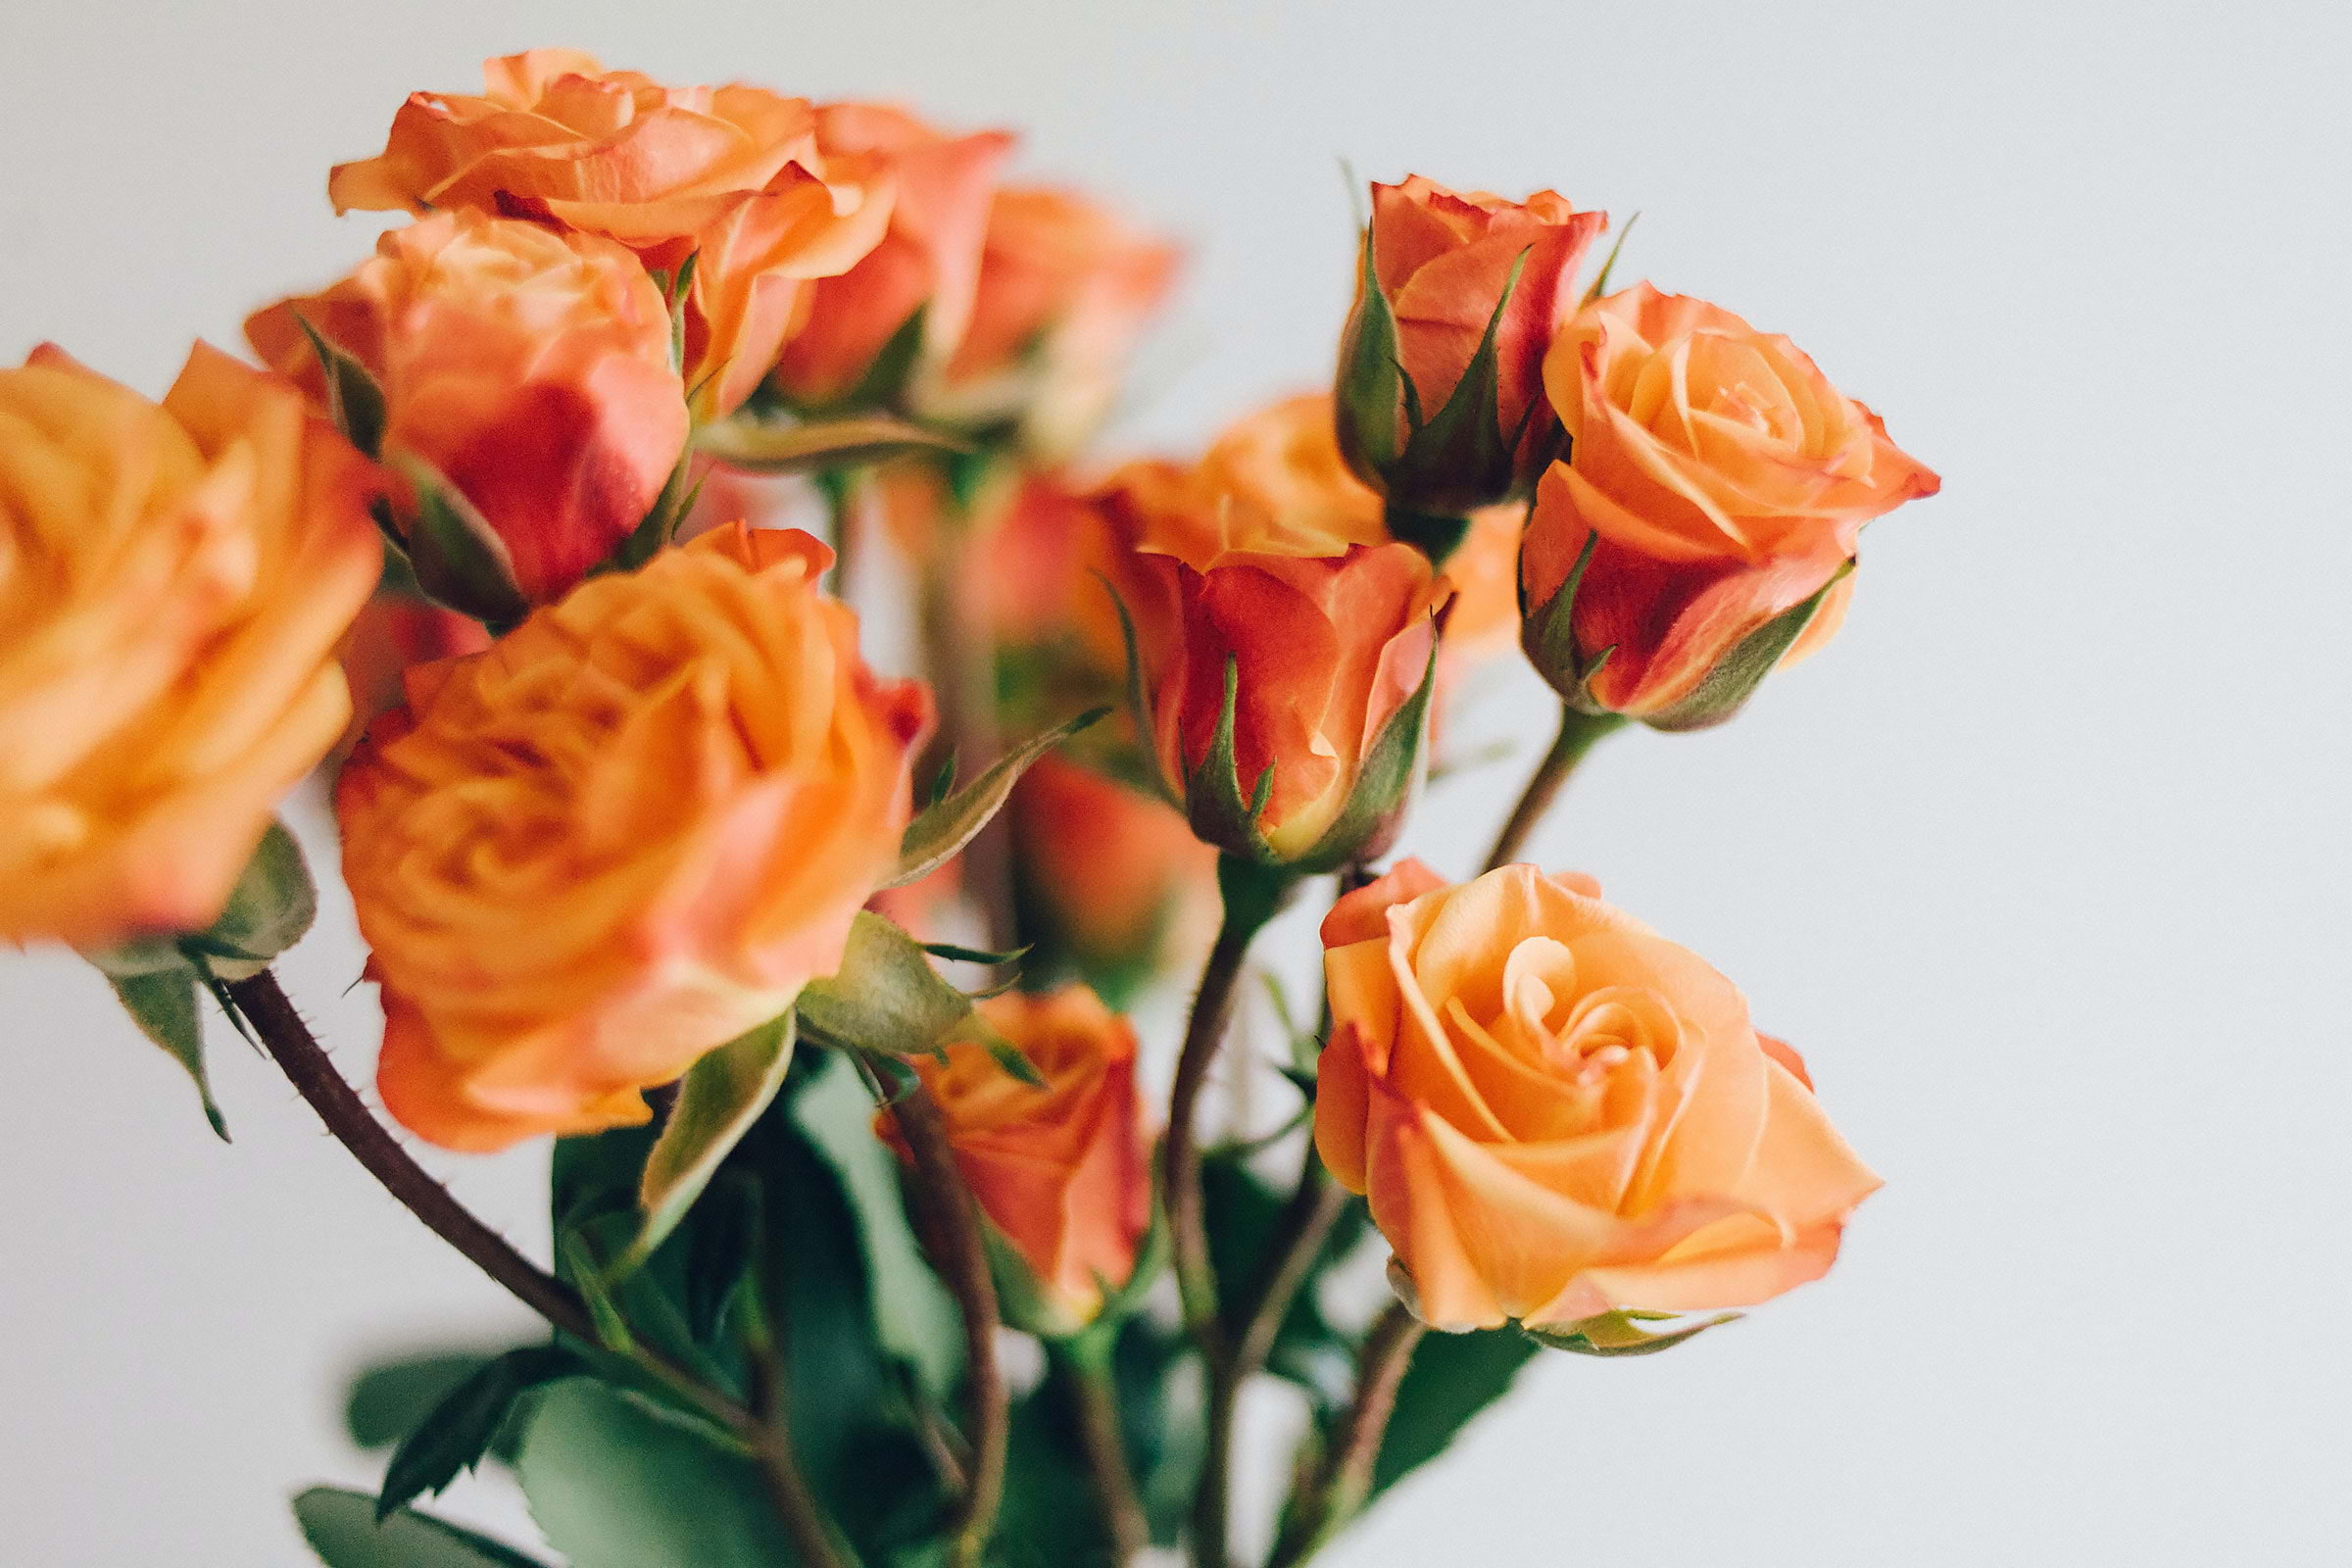 Guide to flower delivery in London